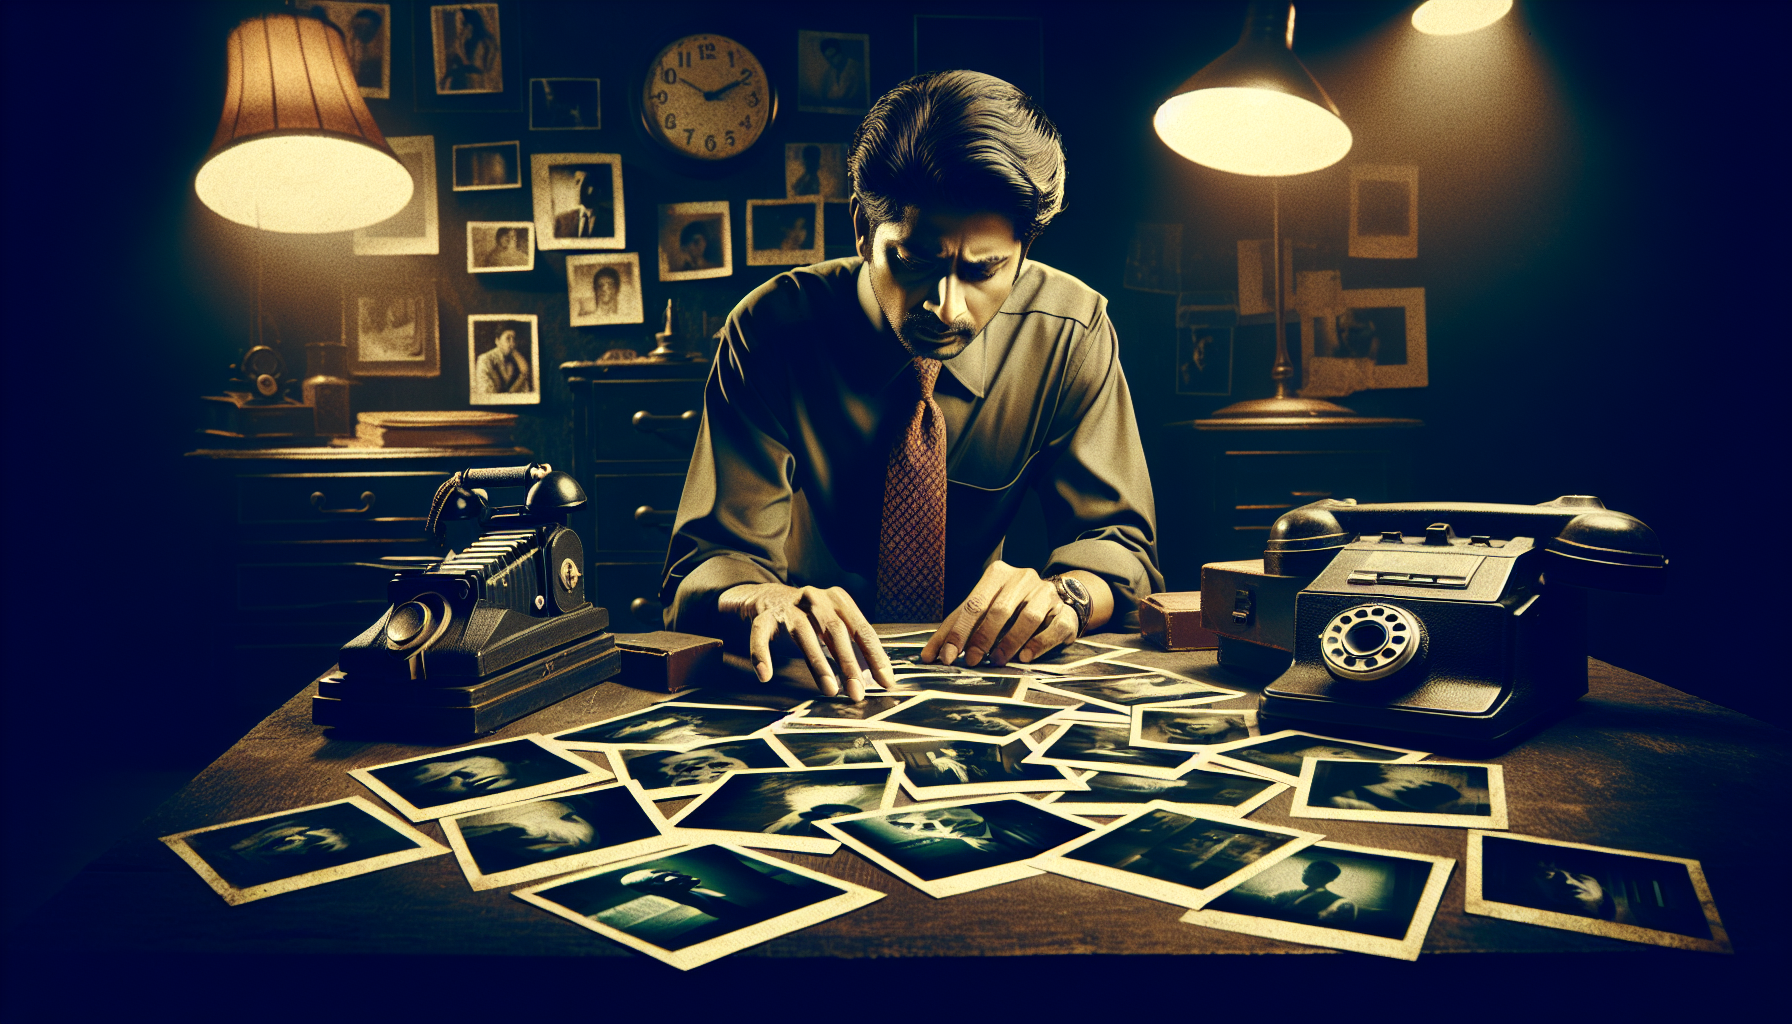 A detailed, artistic representation of a man examining scattered Polaroid photos on a dimly lit desk, each photo revealing a key scene from the movie 'Memento', set in a shadowy, mysterious room, with